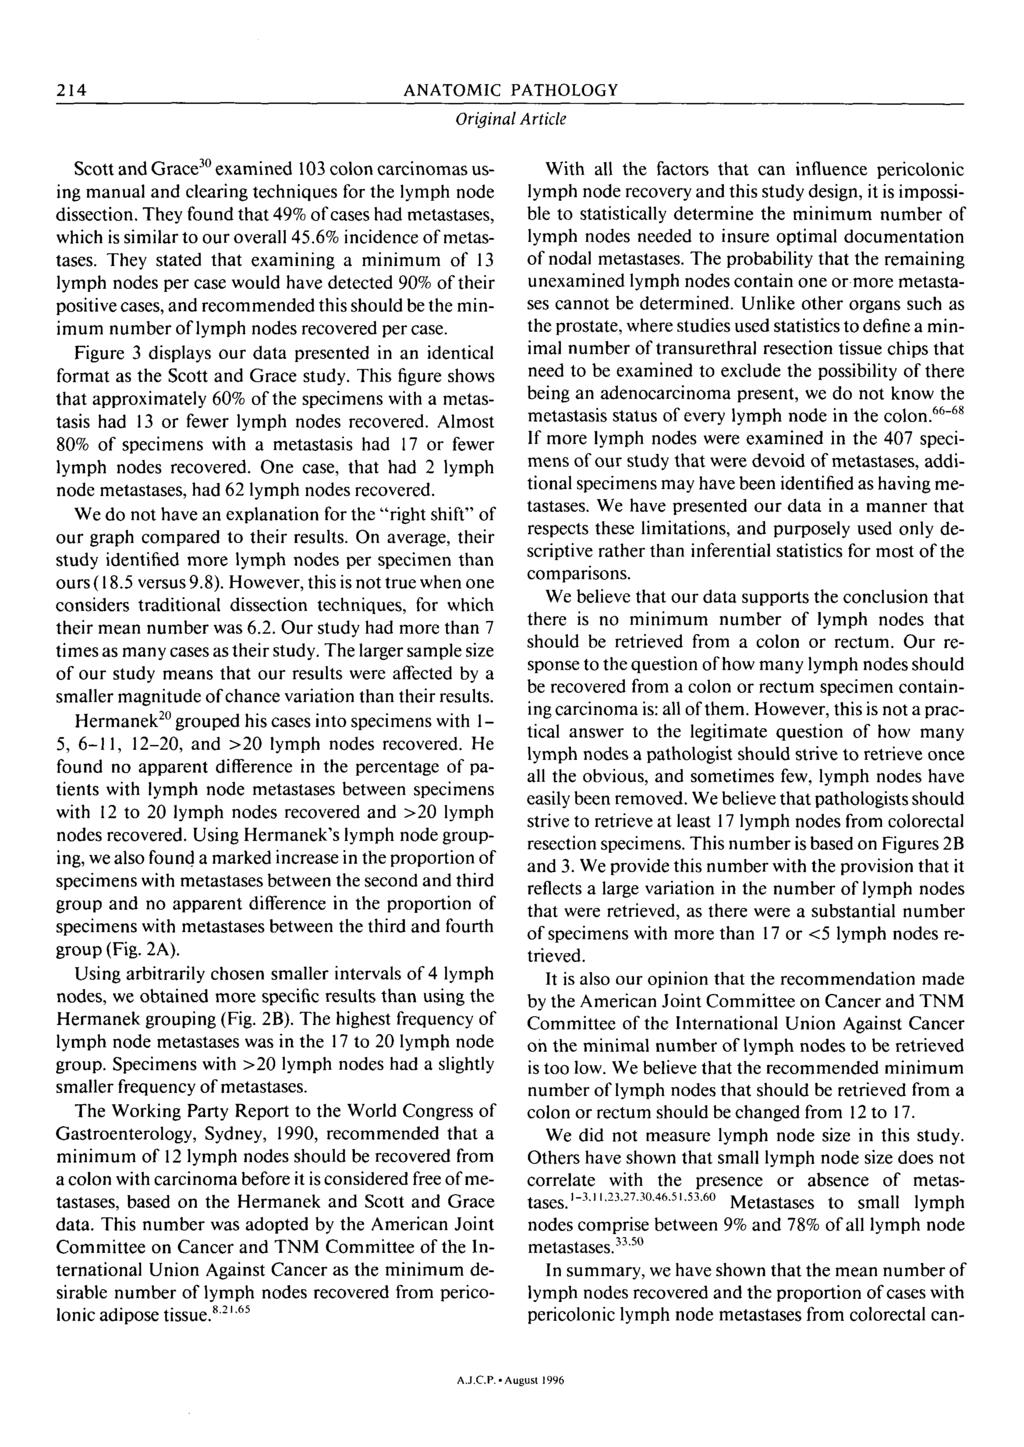 214 ANATOMIC PATHOLOGY Original Article Scott and Grace 30 examined 103 colon carcinomas using manual and clearing techniques for the lymph node dissection.